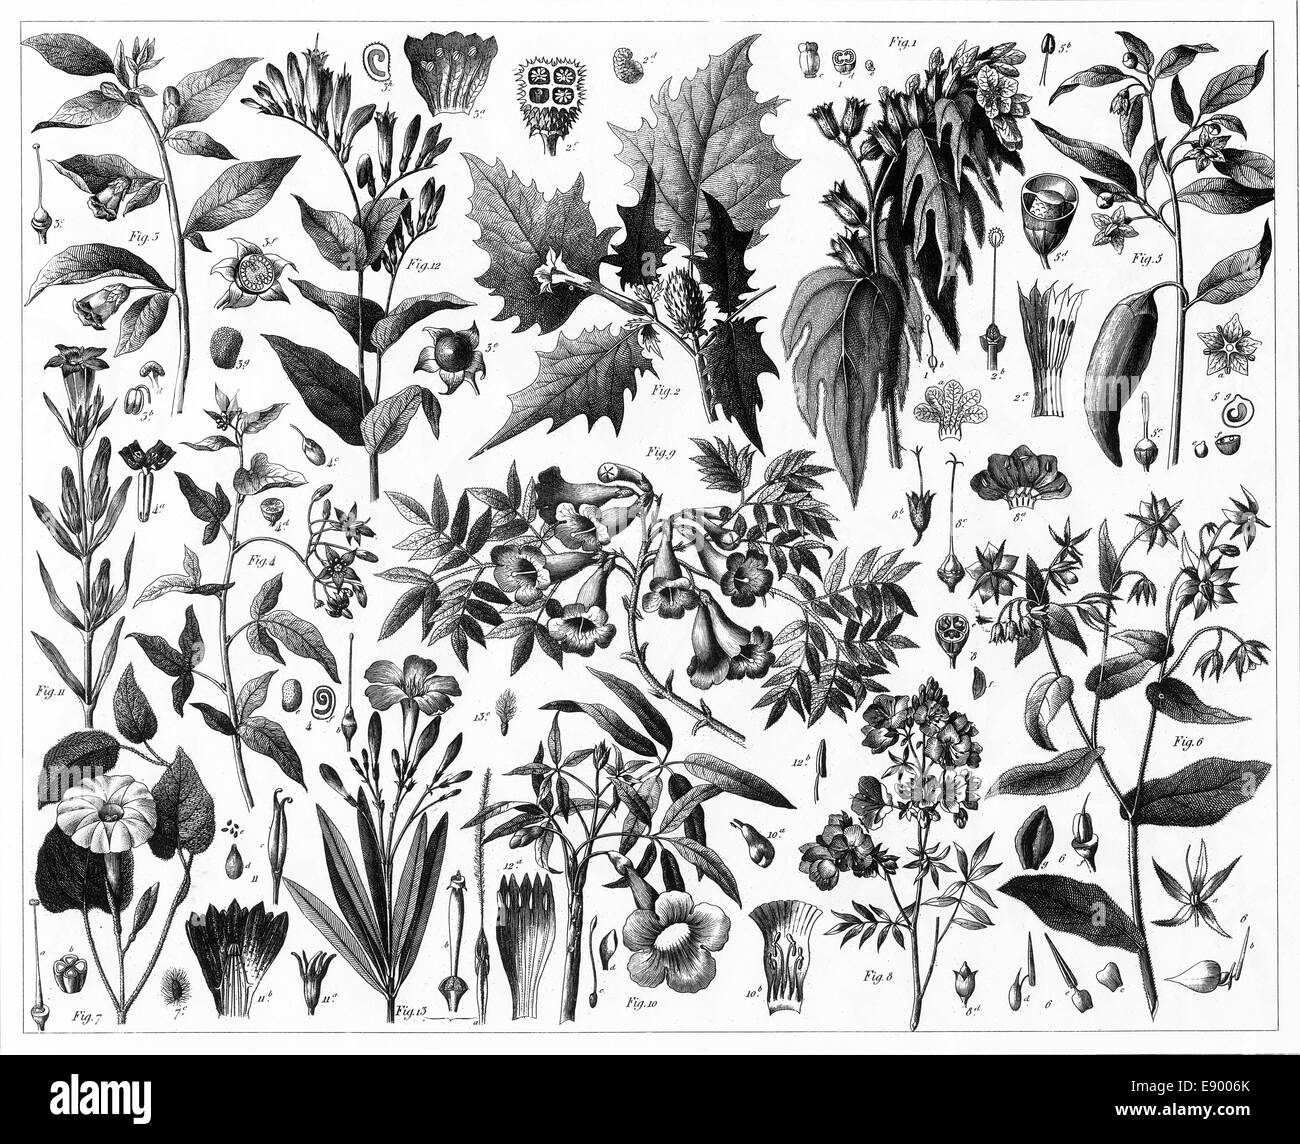 Engraved illustrations of Toxic Plants from Iconographic Encyclopedia ...